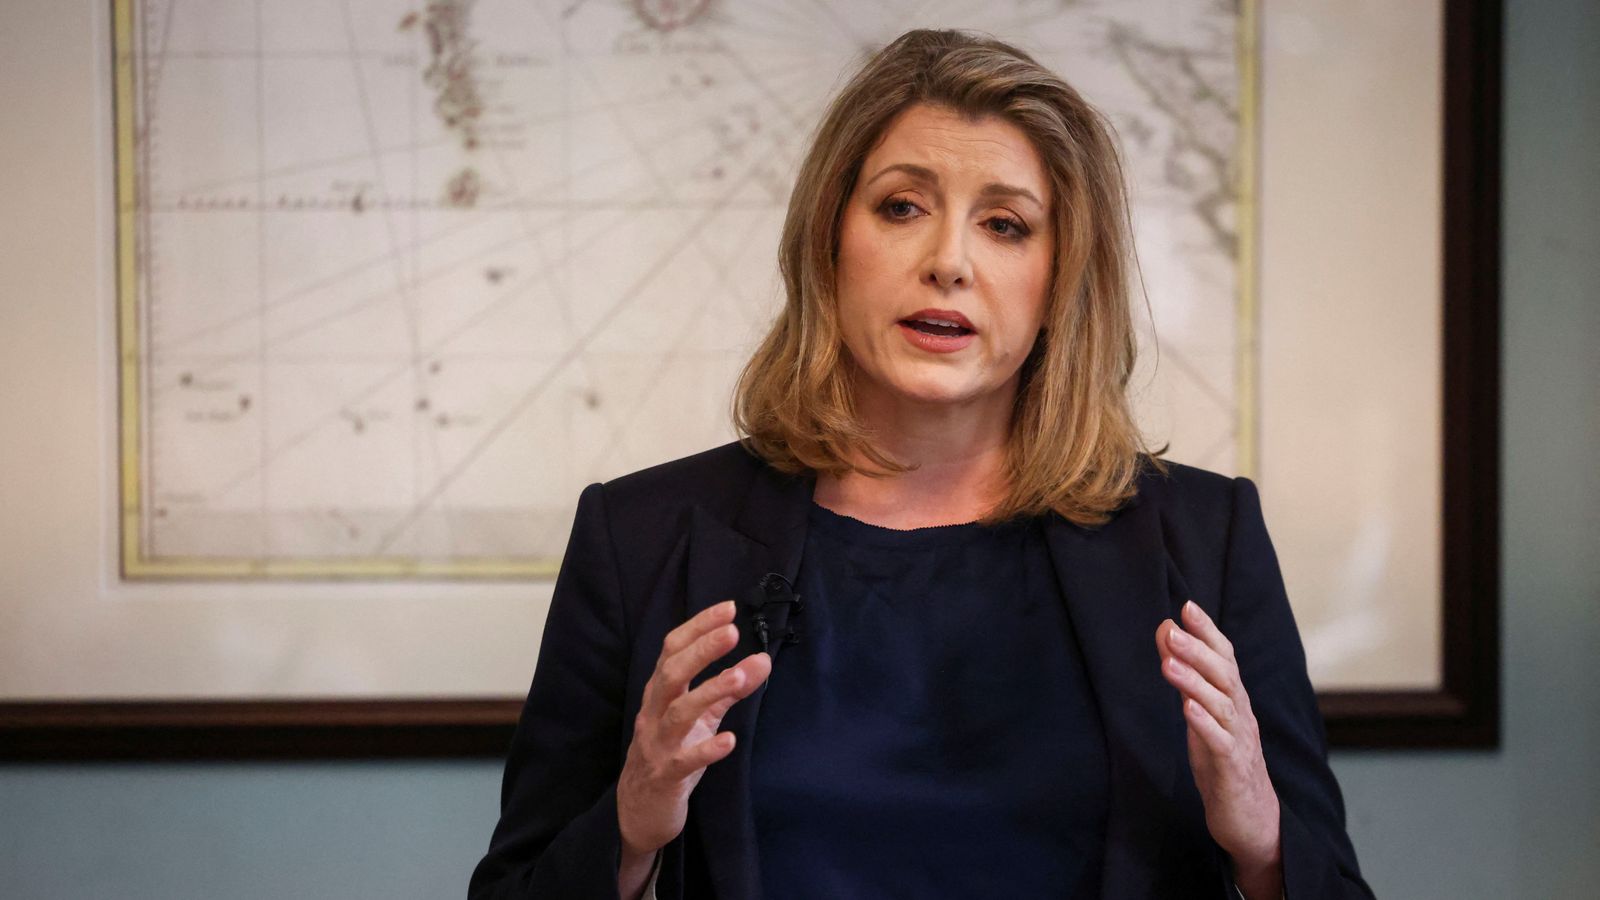 Penny Mordaunt pulls out of Tory leadership race, paving way for Rishi Sunak to become next PM